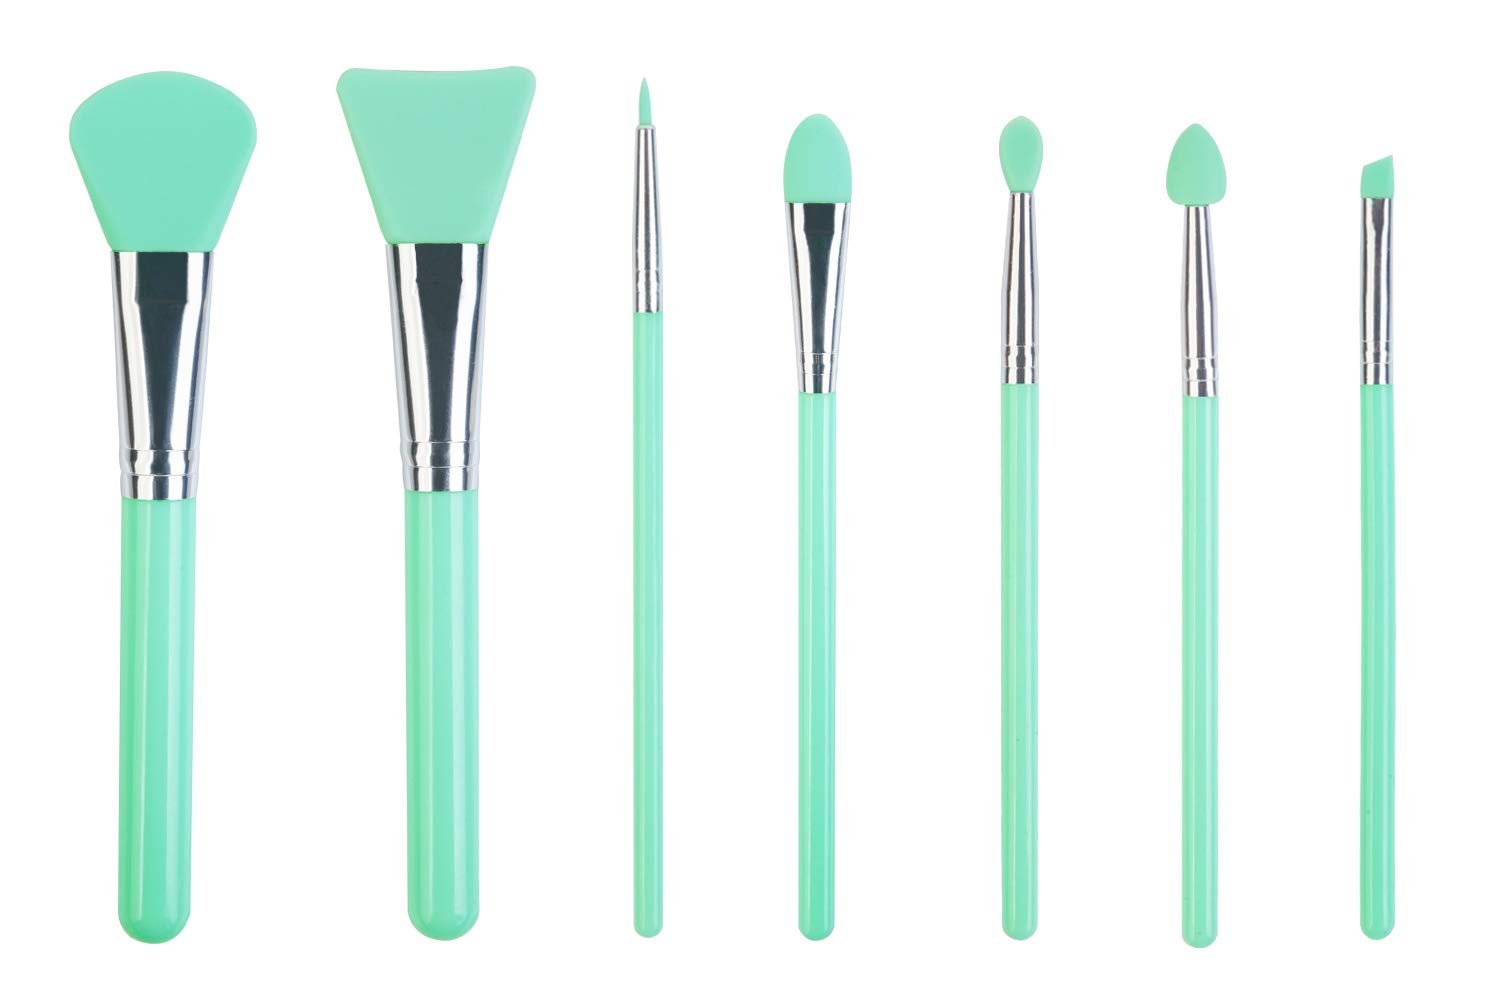 Book Cover Lormay 7Pcs Silicone Makeup Brush Set: Face Mask, Eyeliner, Eyebrow, Eye Shadow and Lip Brushes. Perfect Applicators for BB CC Cream, Facial Mask, and Liquid-like Beauty Products (Mint Green)